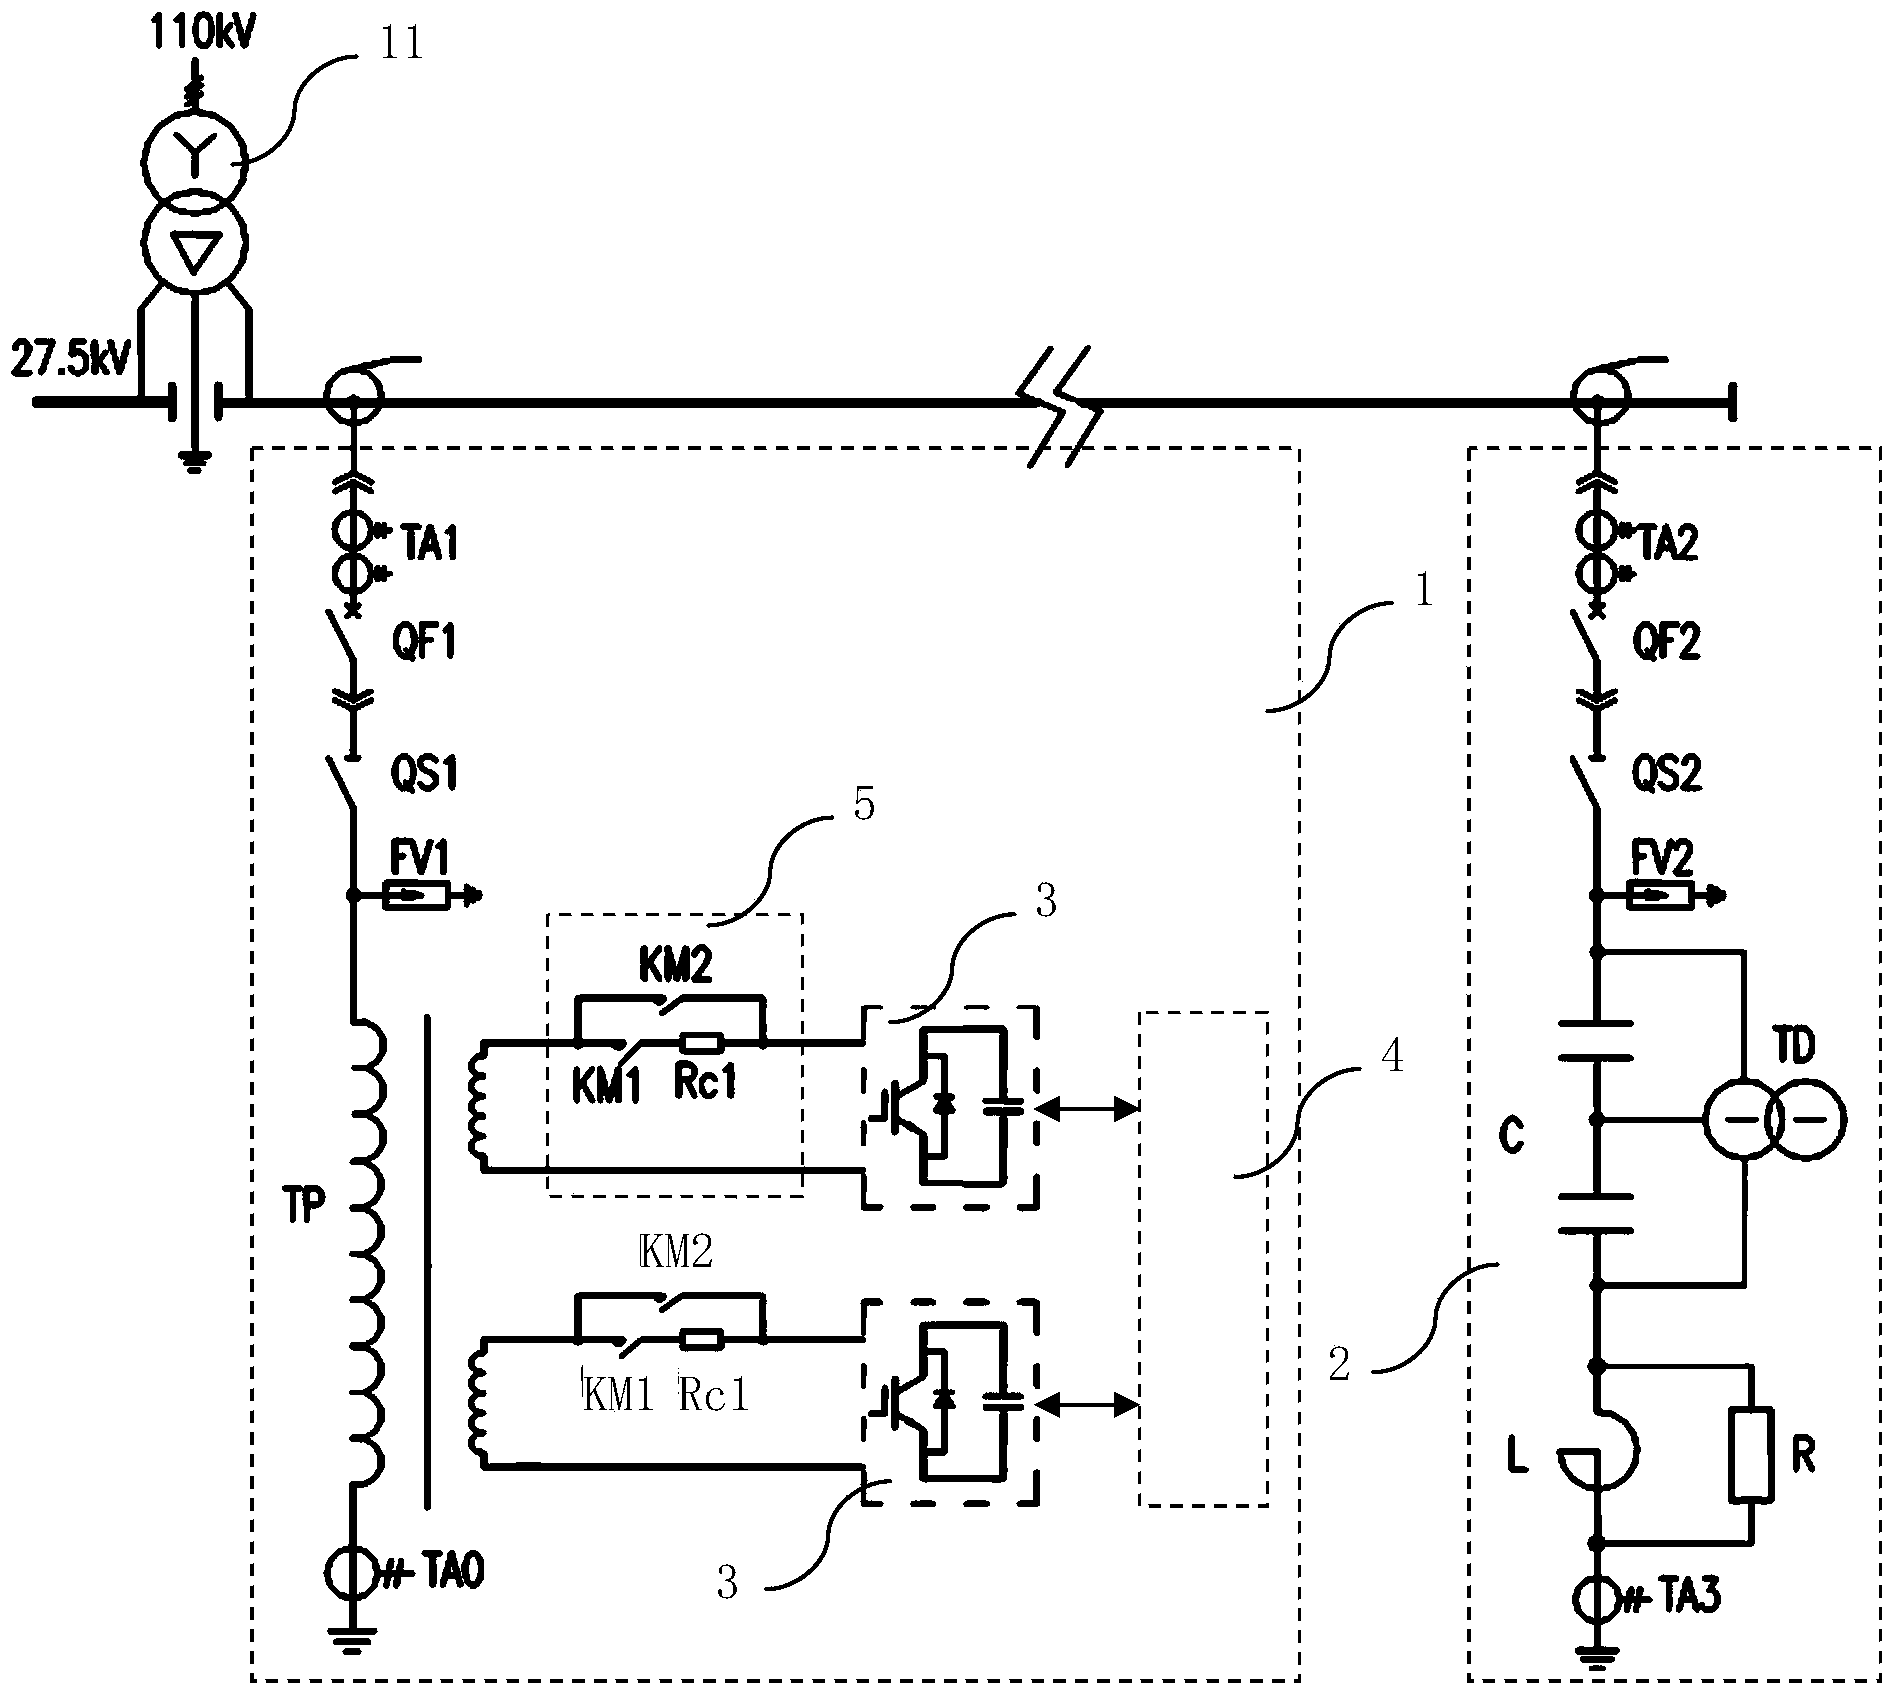 Power quality integrated management device of electrified railway traction supply network